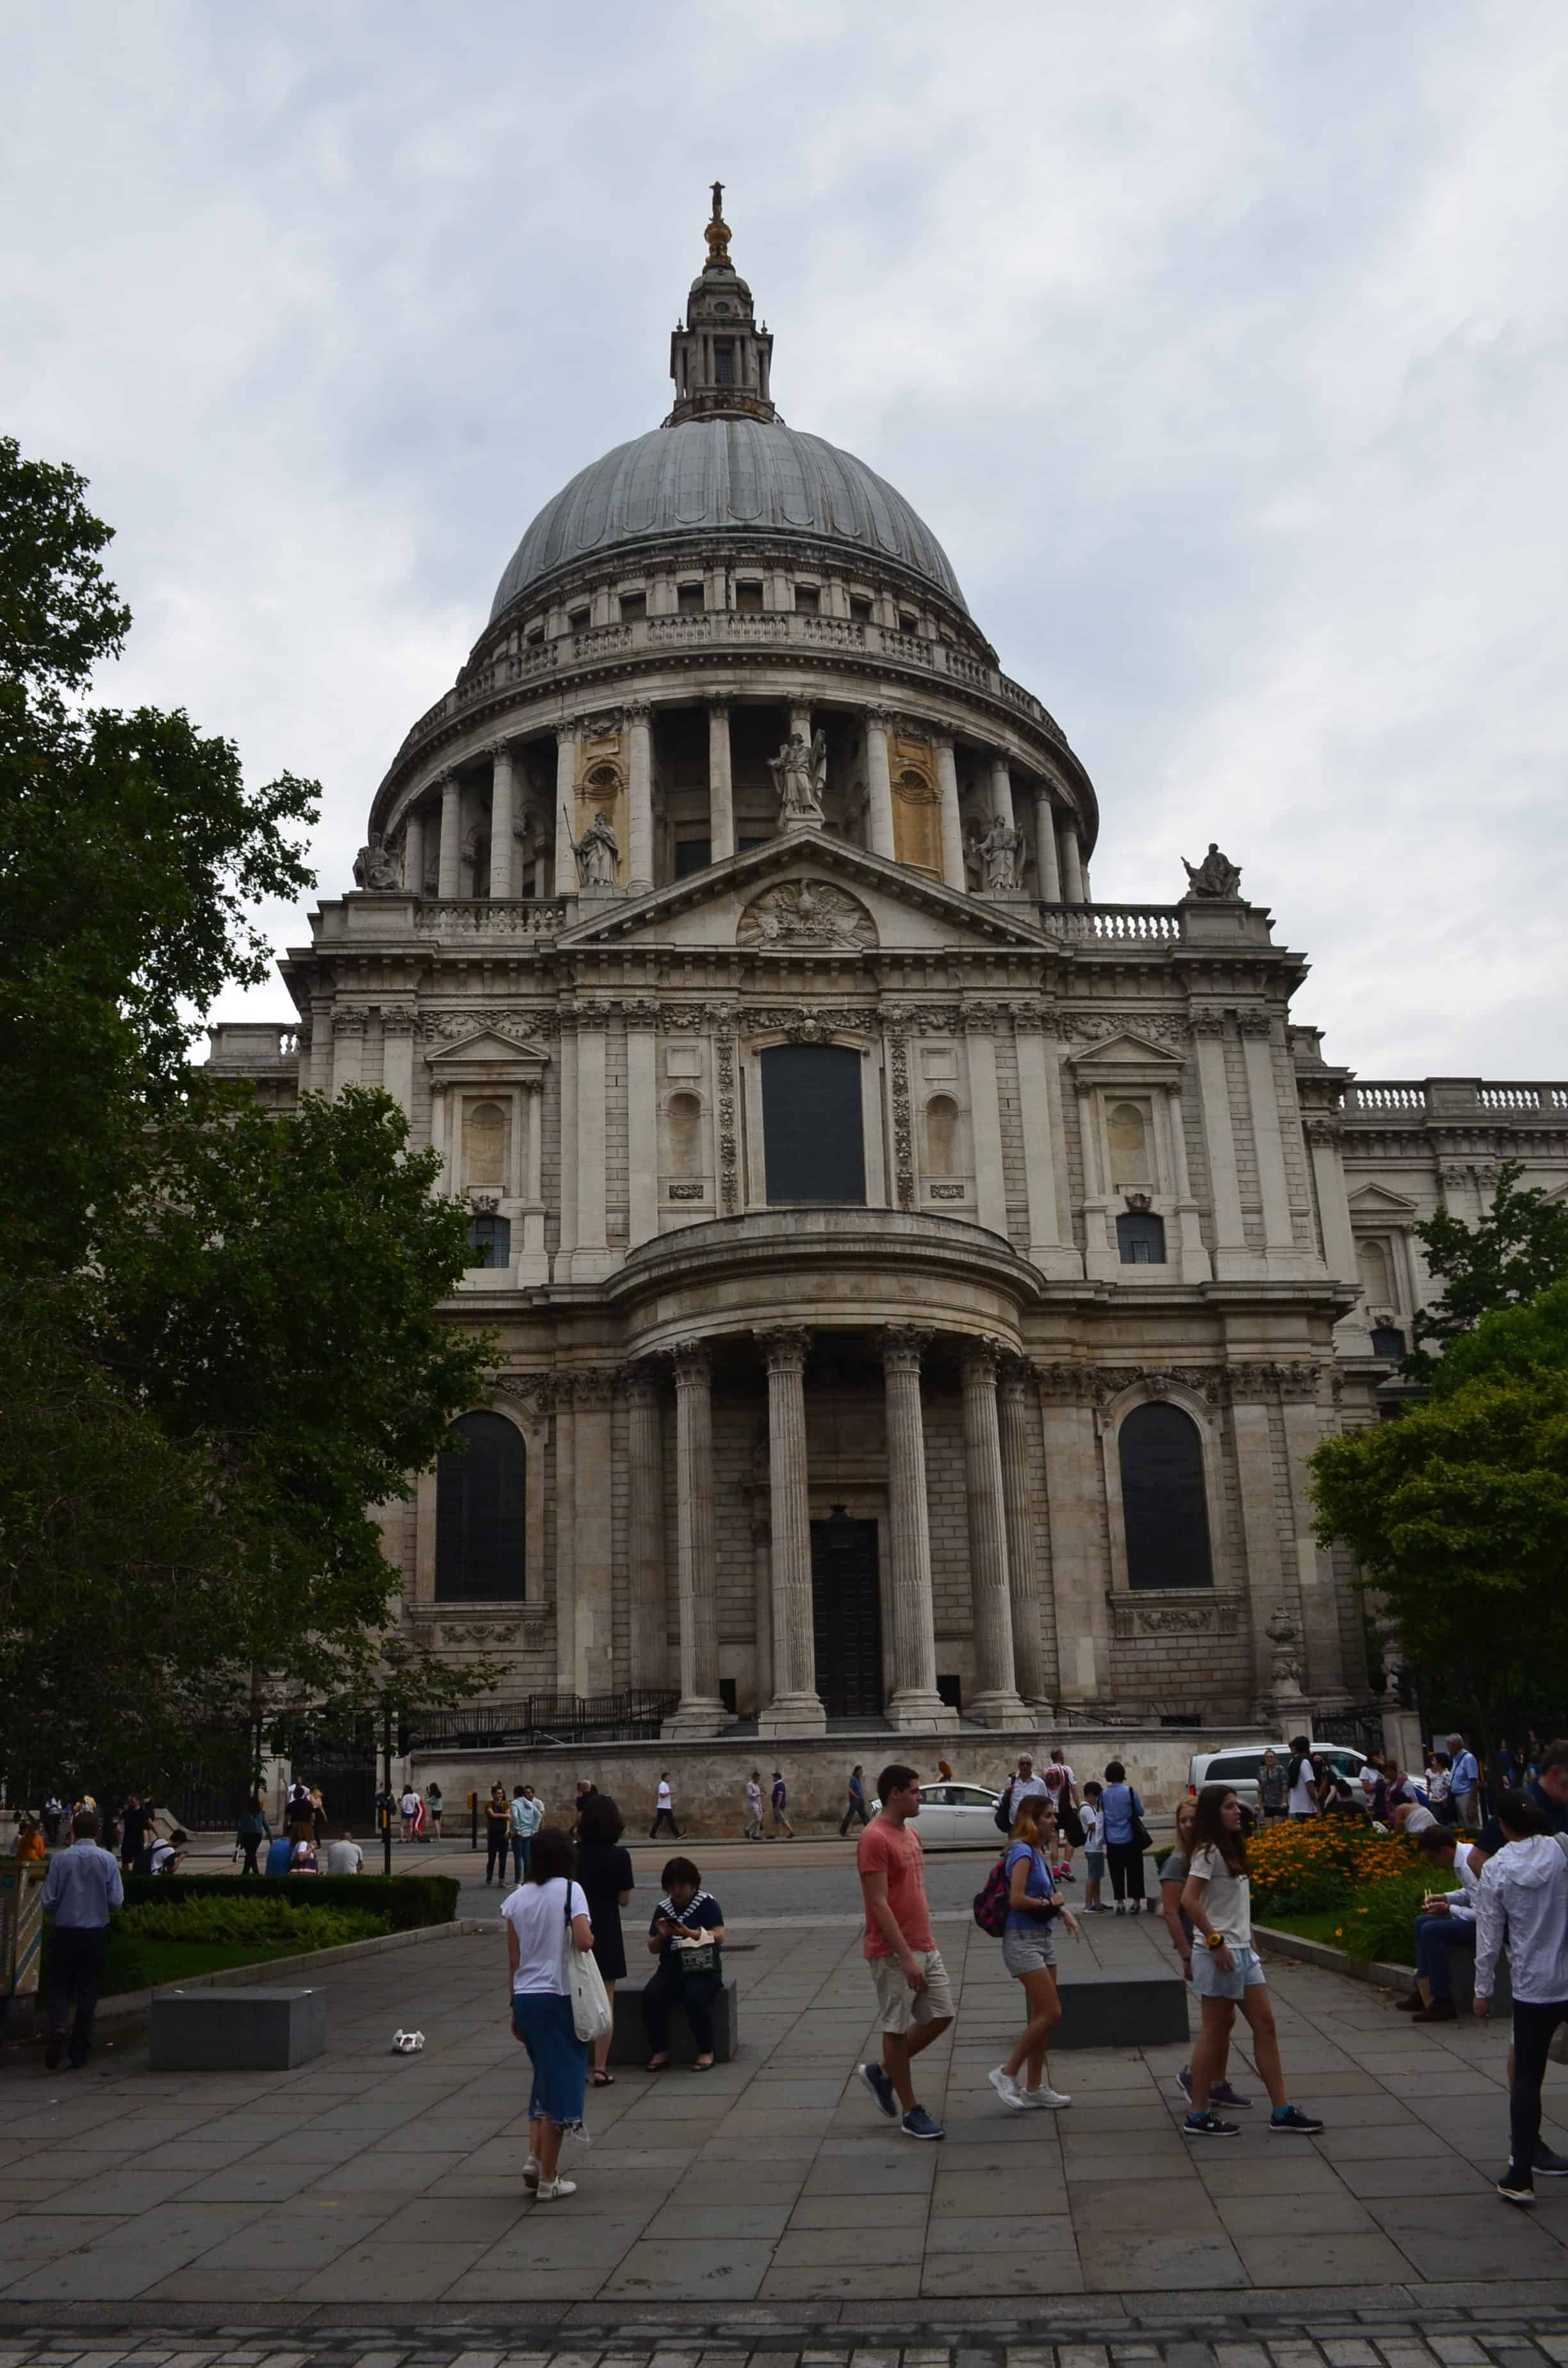 St. Paul's Cathedral in the City of London, England